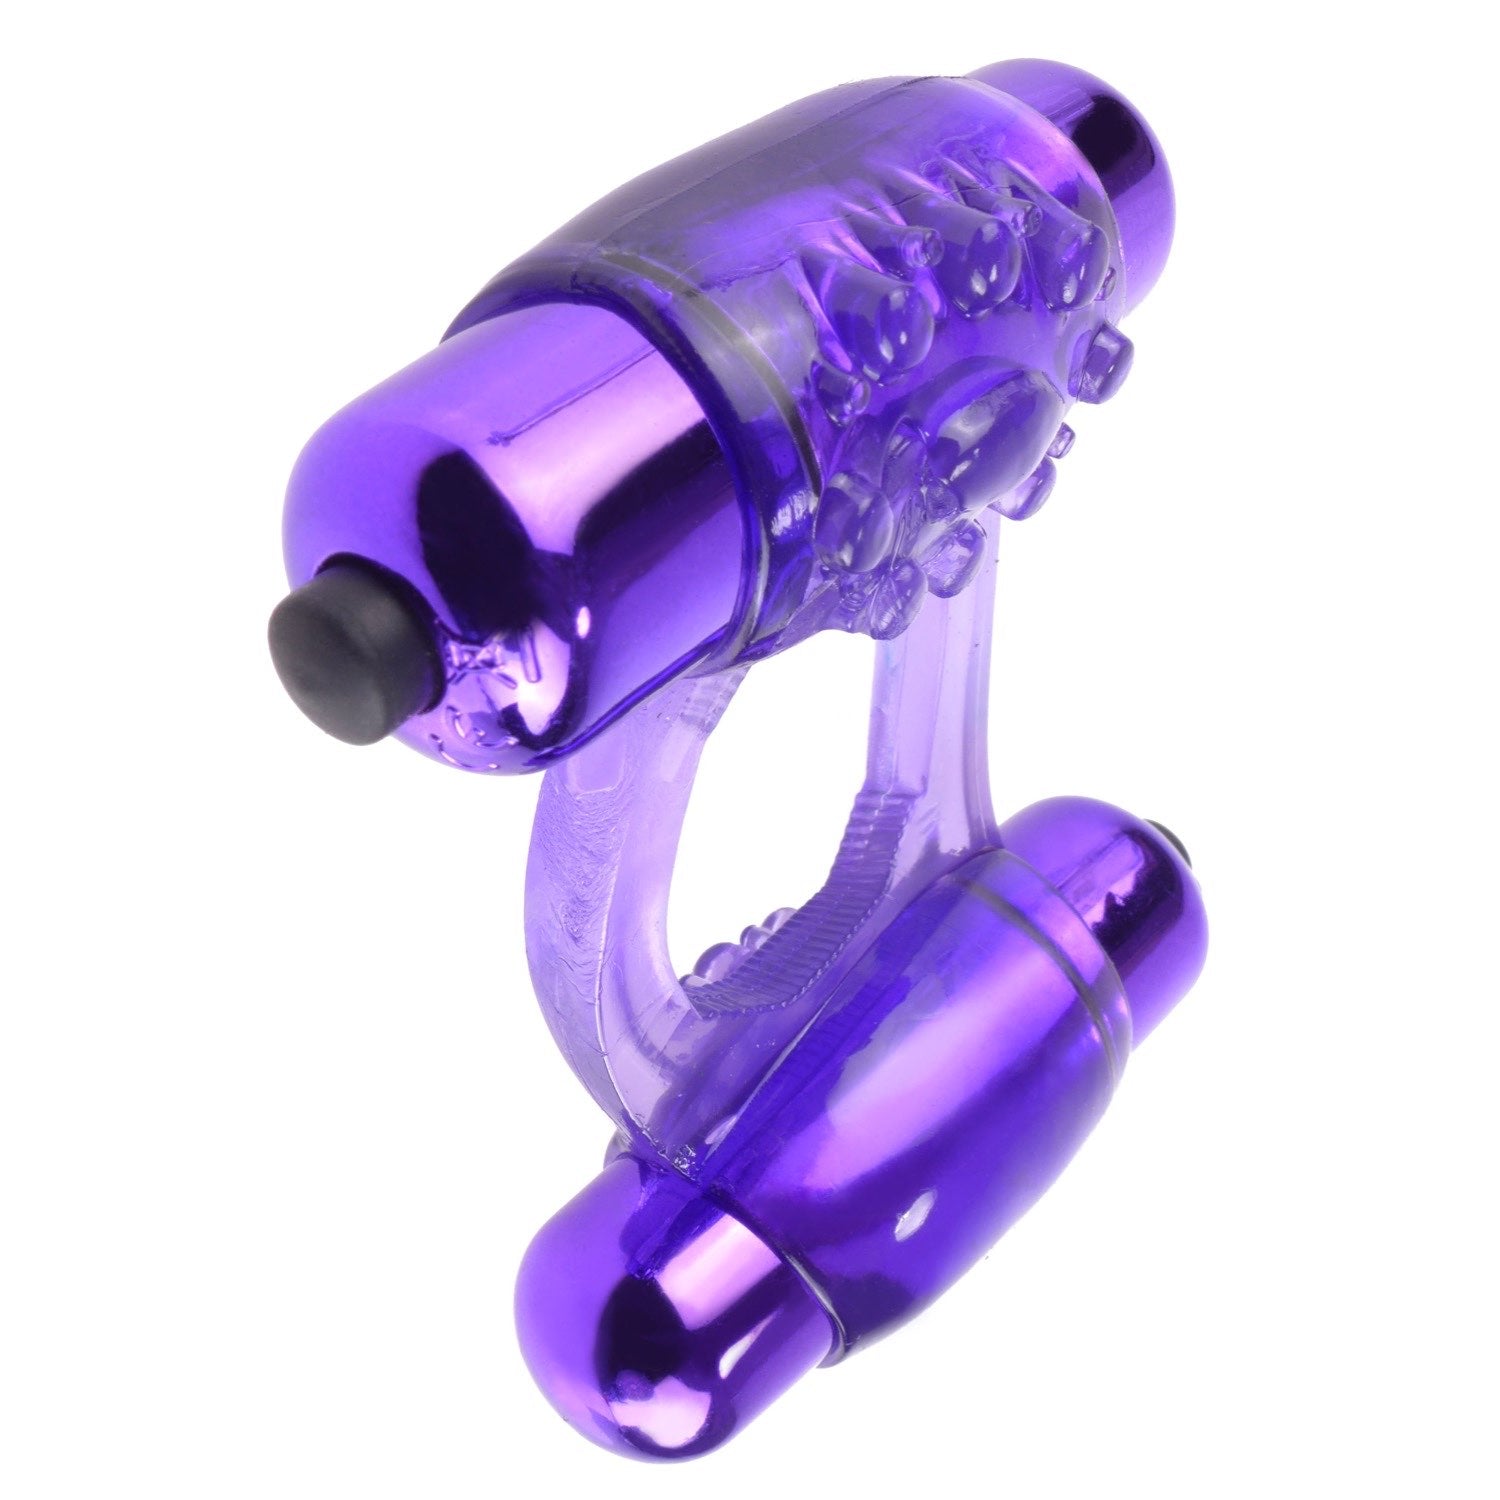 Fantasy C-Ringz Duo-Vibrating Super Ring - Purple Dual Vibrating Cock Ring by Pipedream